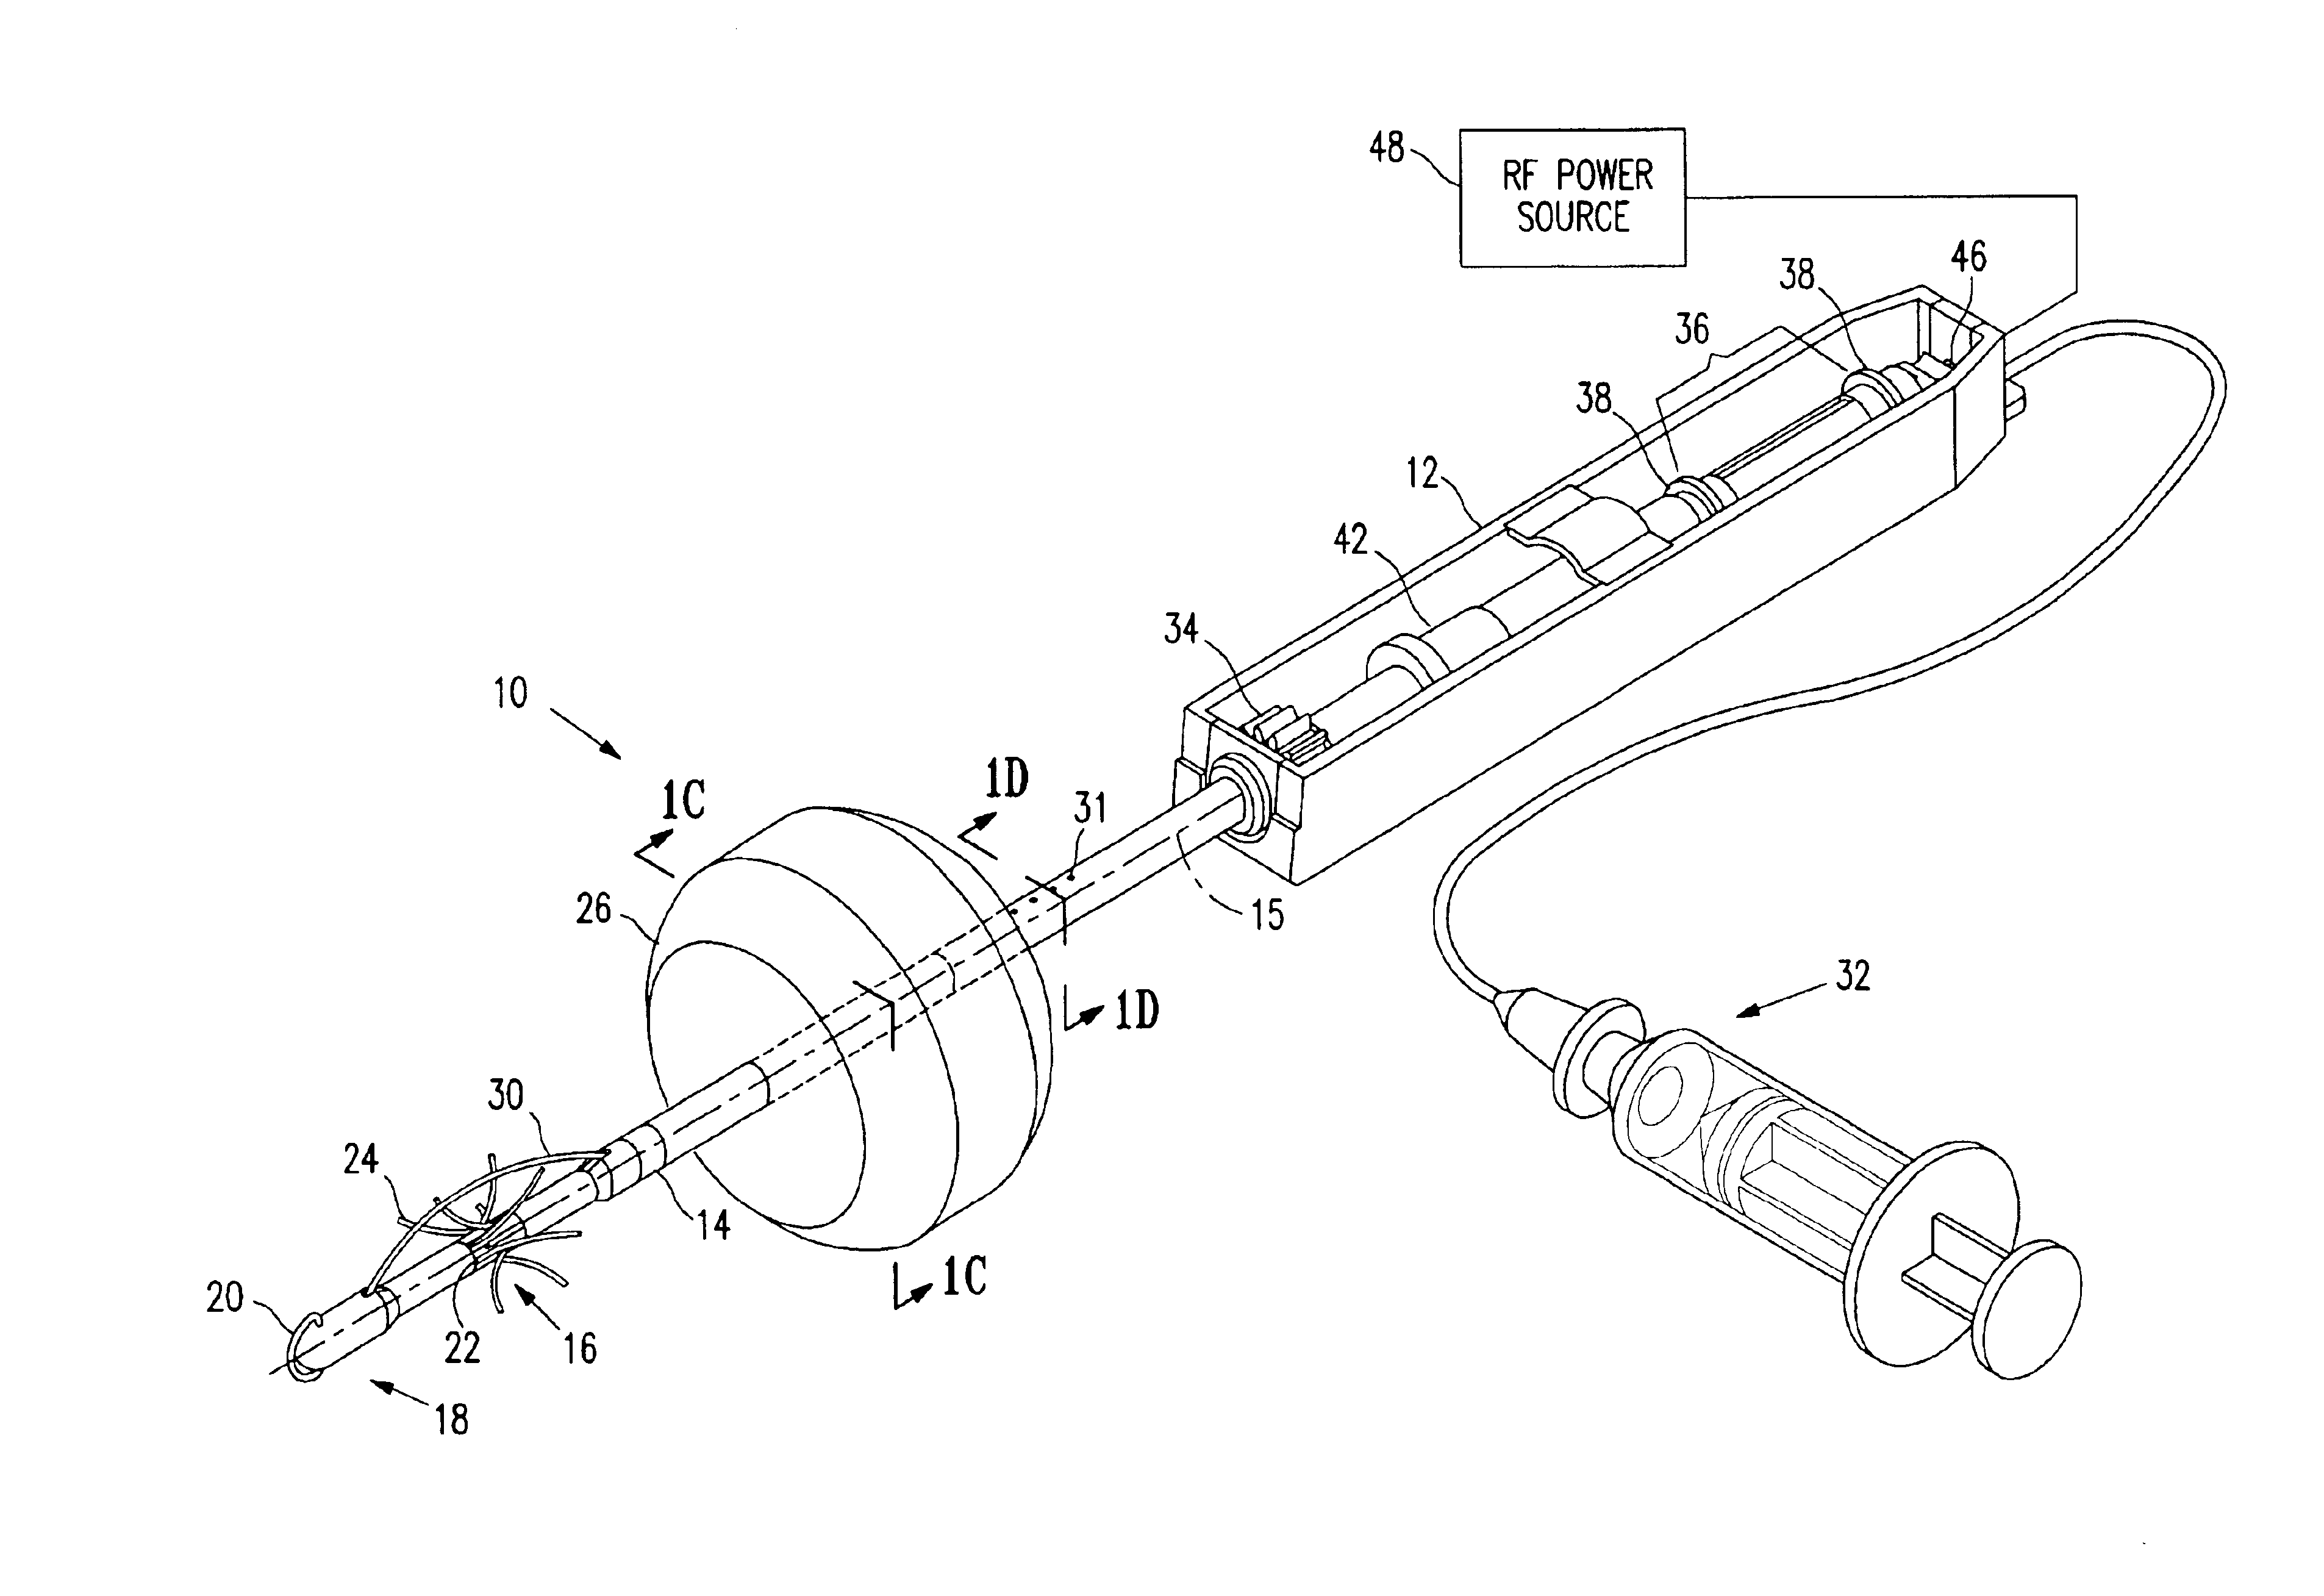 Dilation devices and methods for removing tissue specimens